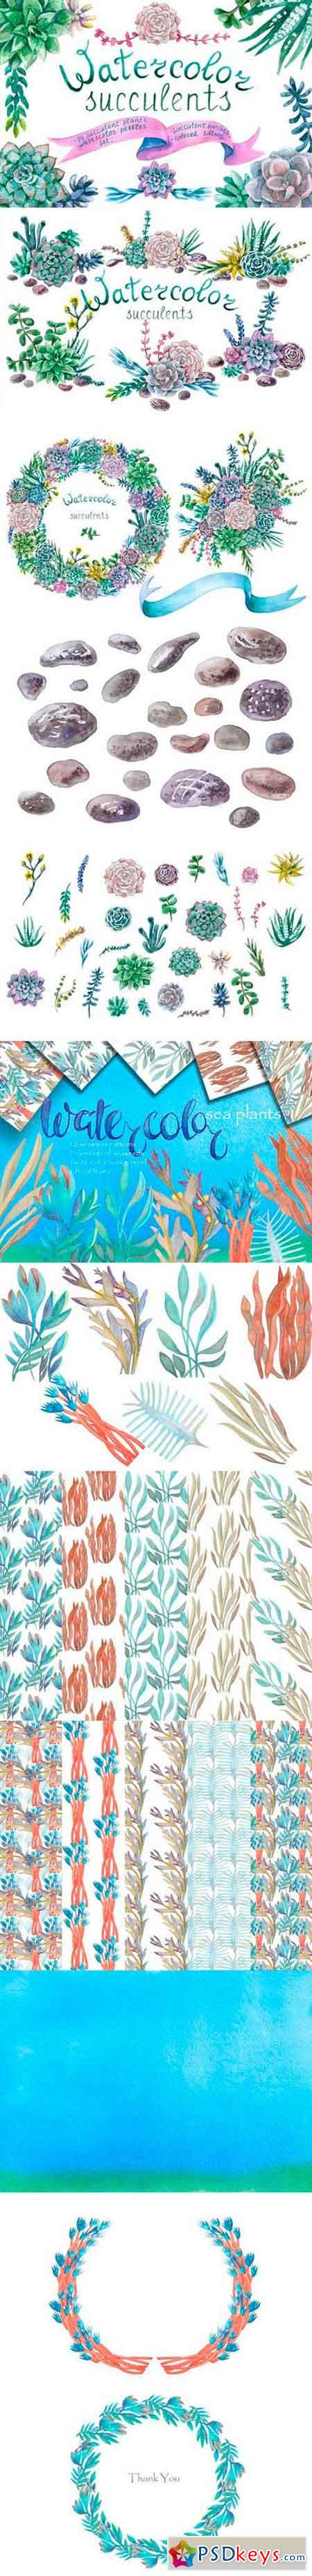 Watercolor sea plants, Succulent and patterns